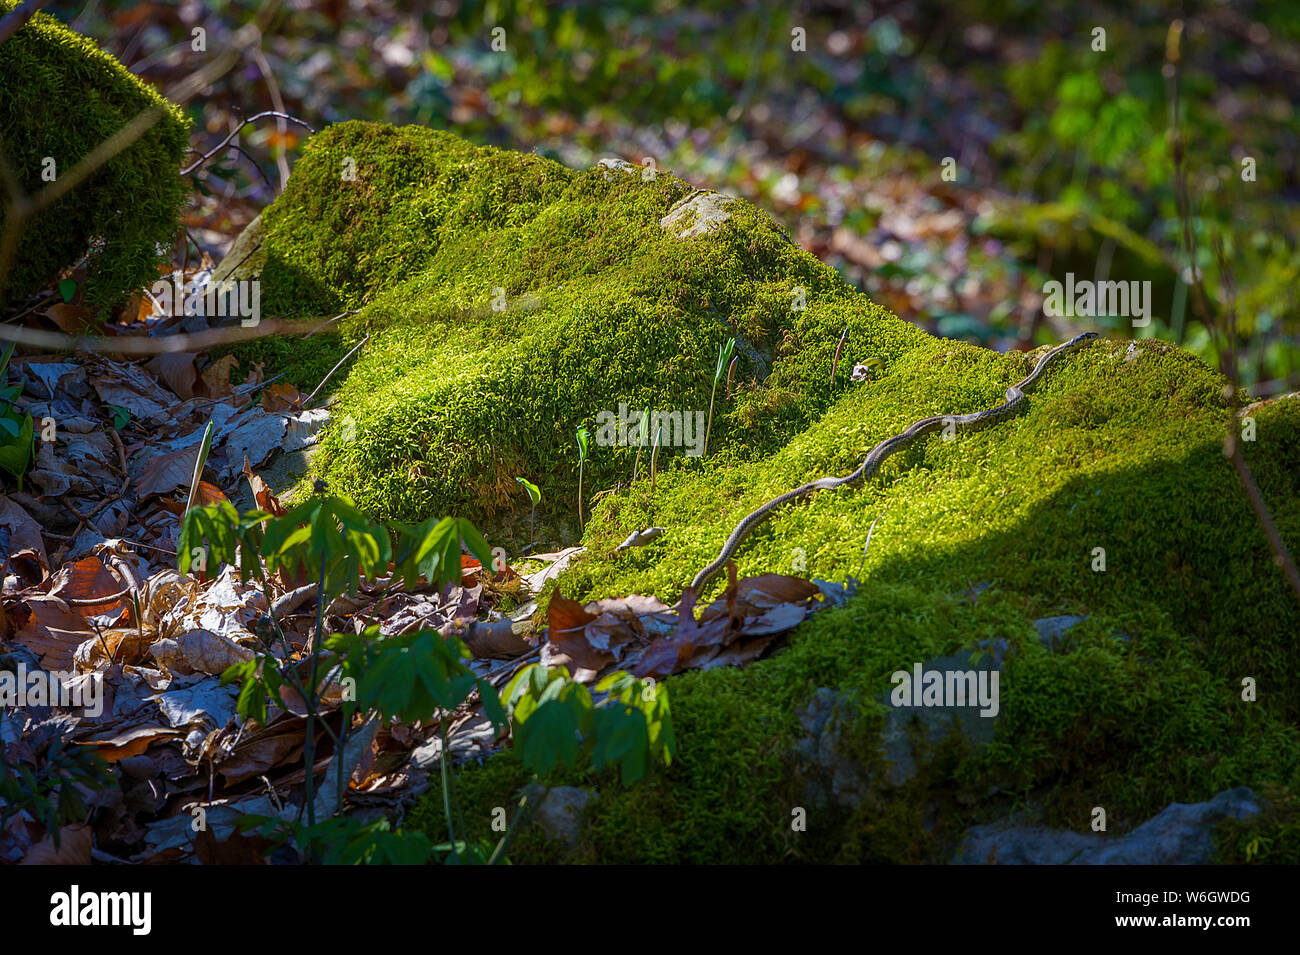 Sunlight  exposes a garter snake slithering across a moss covered rock. Stock Photo